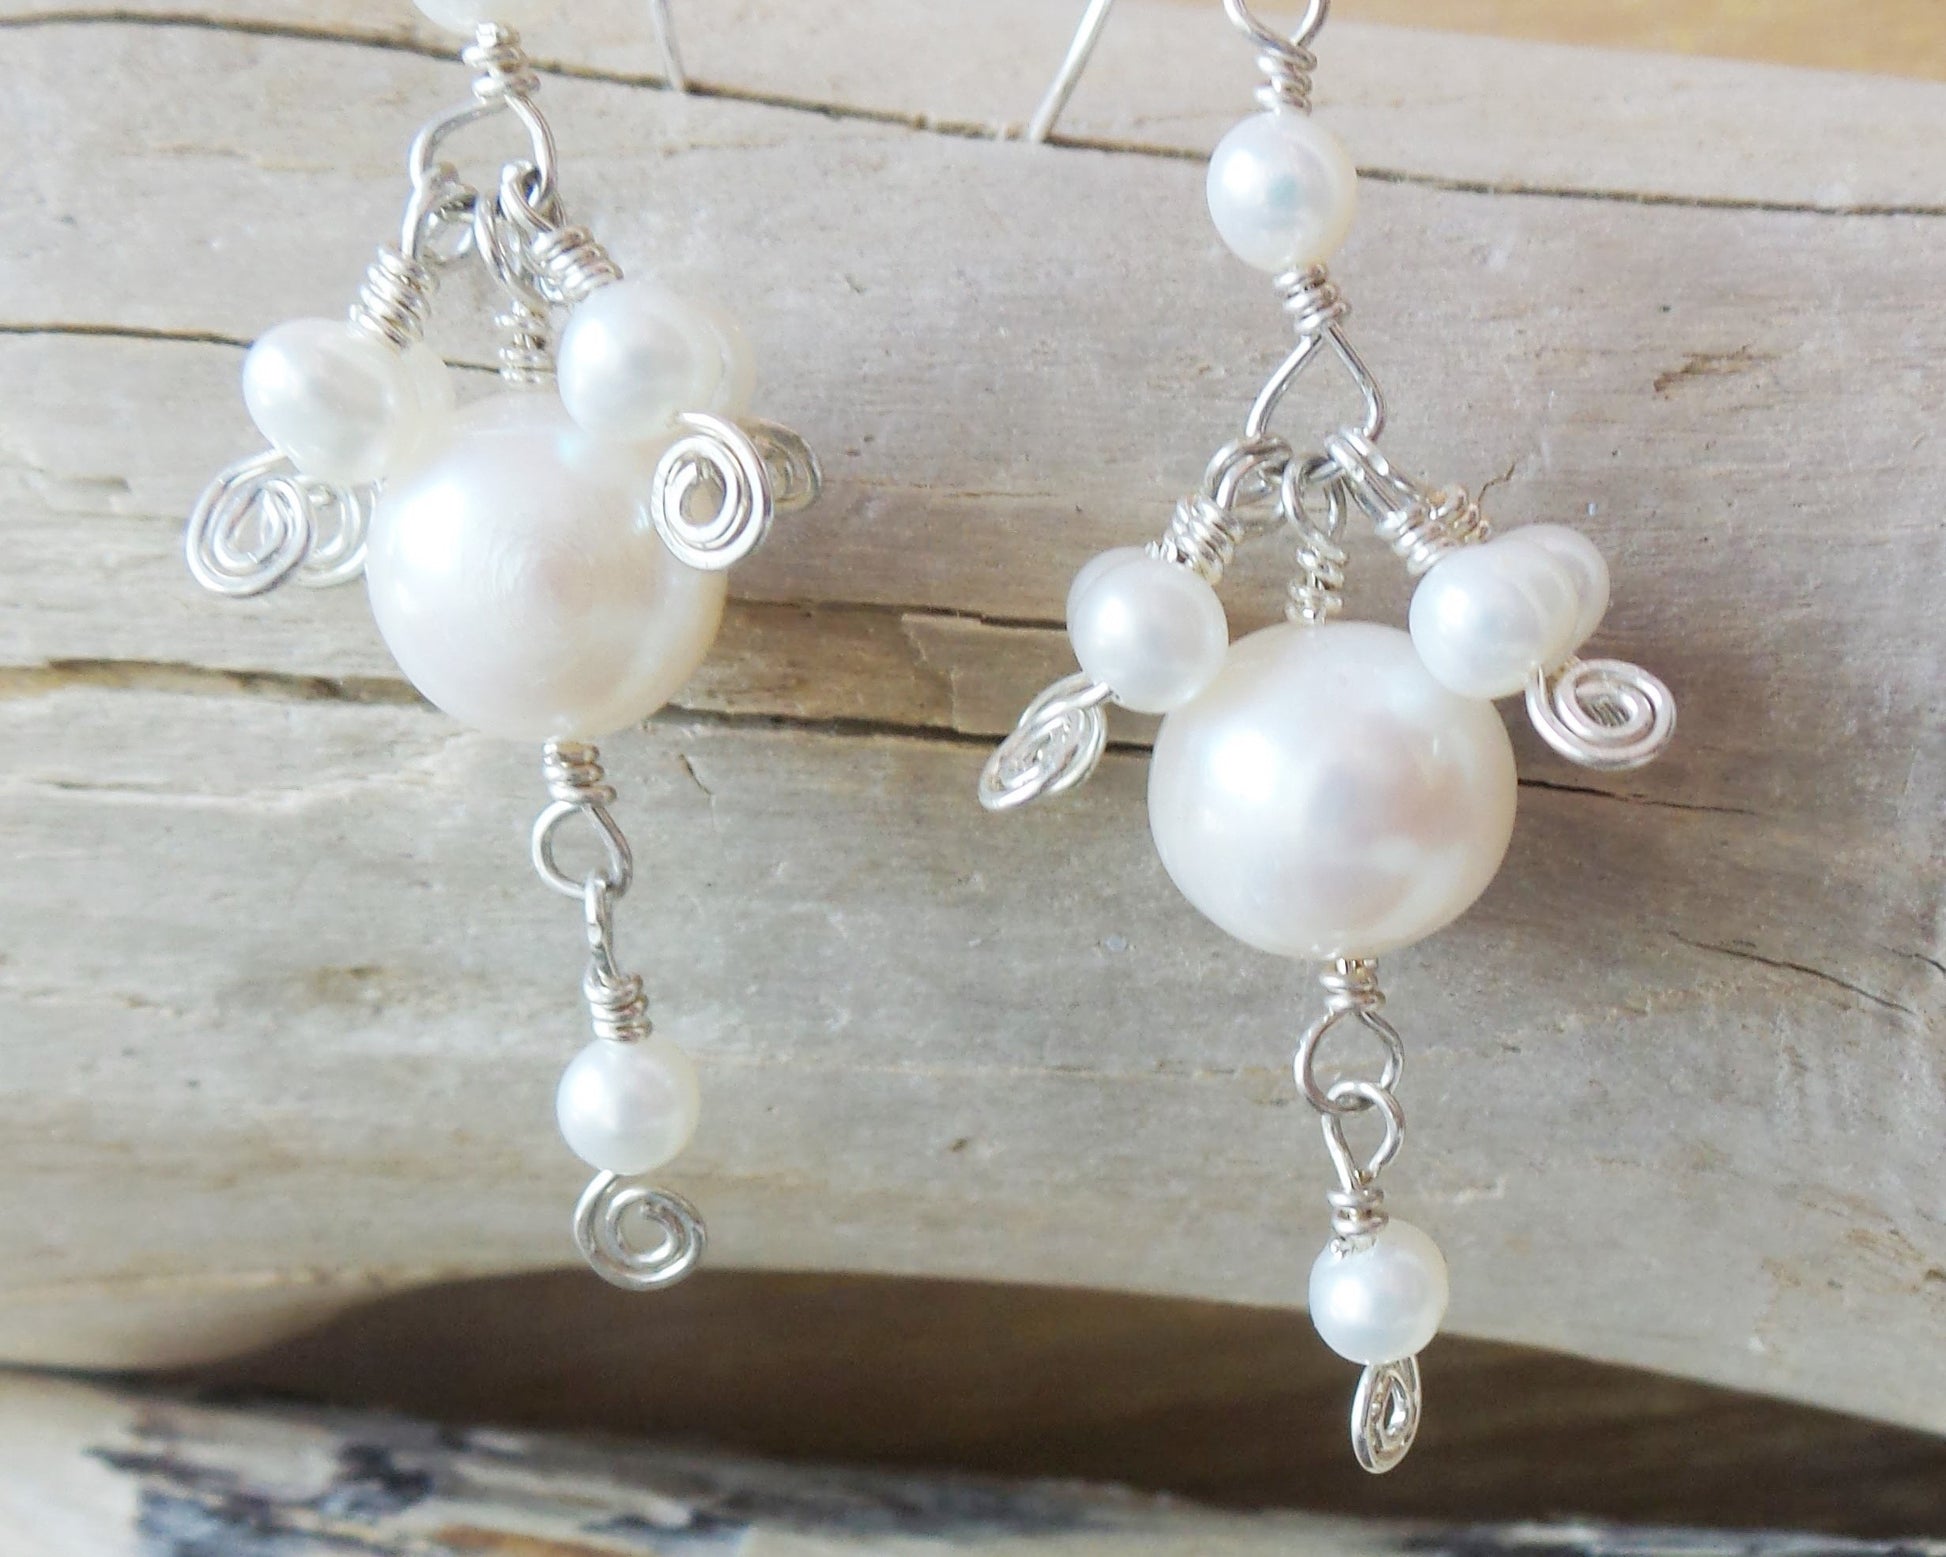 Eternal Celtic Jig Pearl Earrings, Unique Long Sterling Silver White Freshwater Cultured Pearl Earrings with Celtic Eternit coils on the ends of the small pearlss